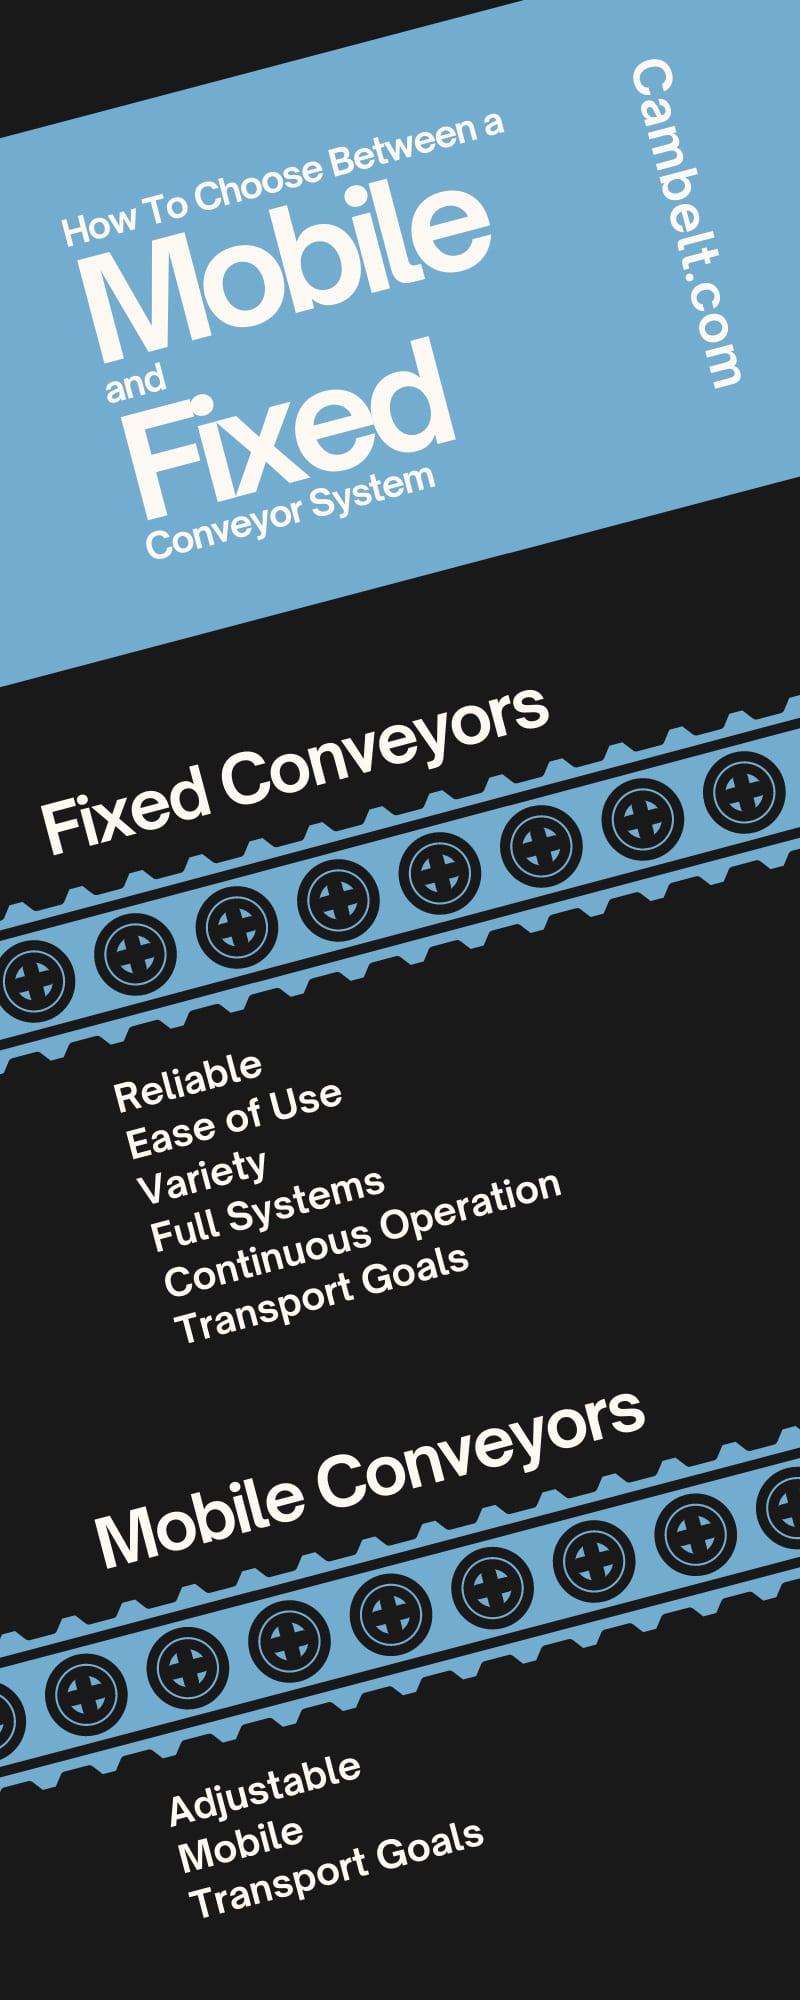 How To Choose Between a Mobile and Fixed Conveyor System